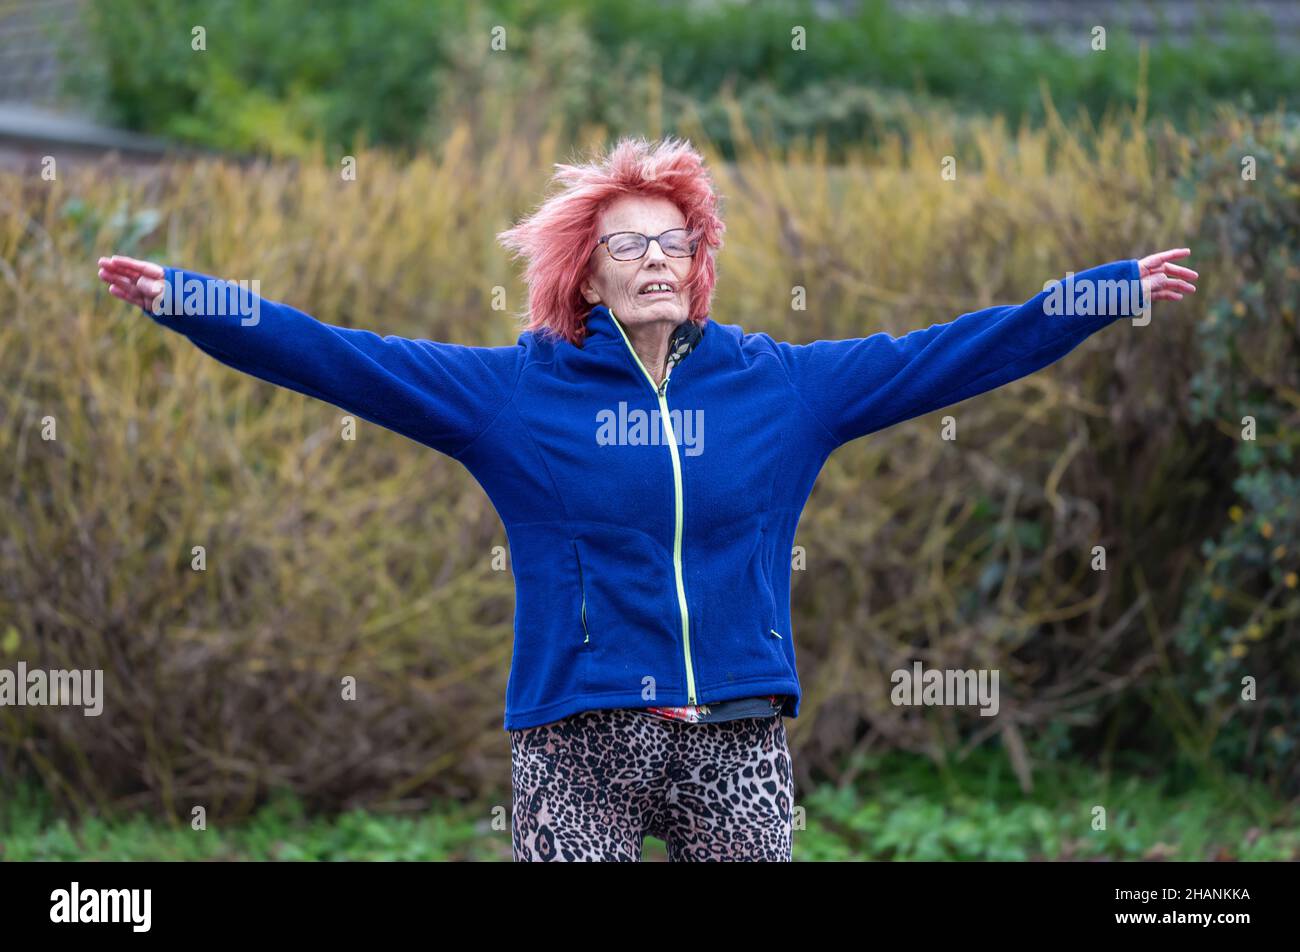 Elderly senior woman in her 80s exercising outside doing star jumps in Winter. Old lady keeping a healthy active lifestyle. Stock Photo